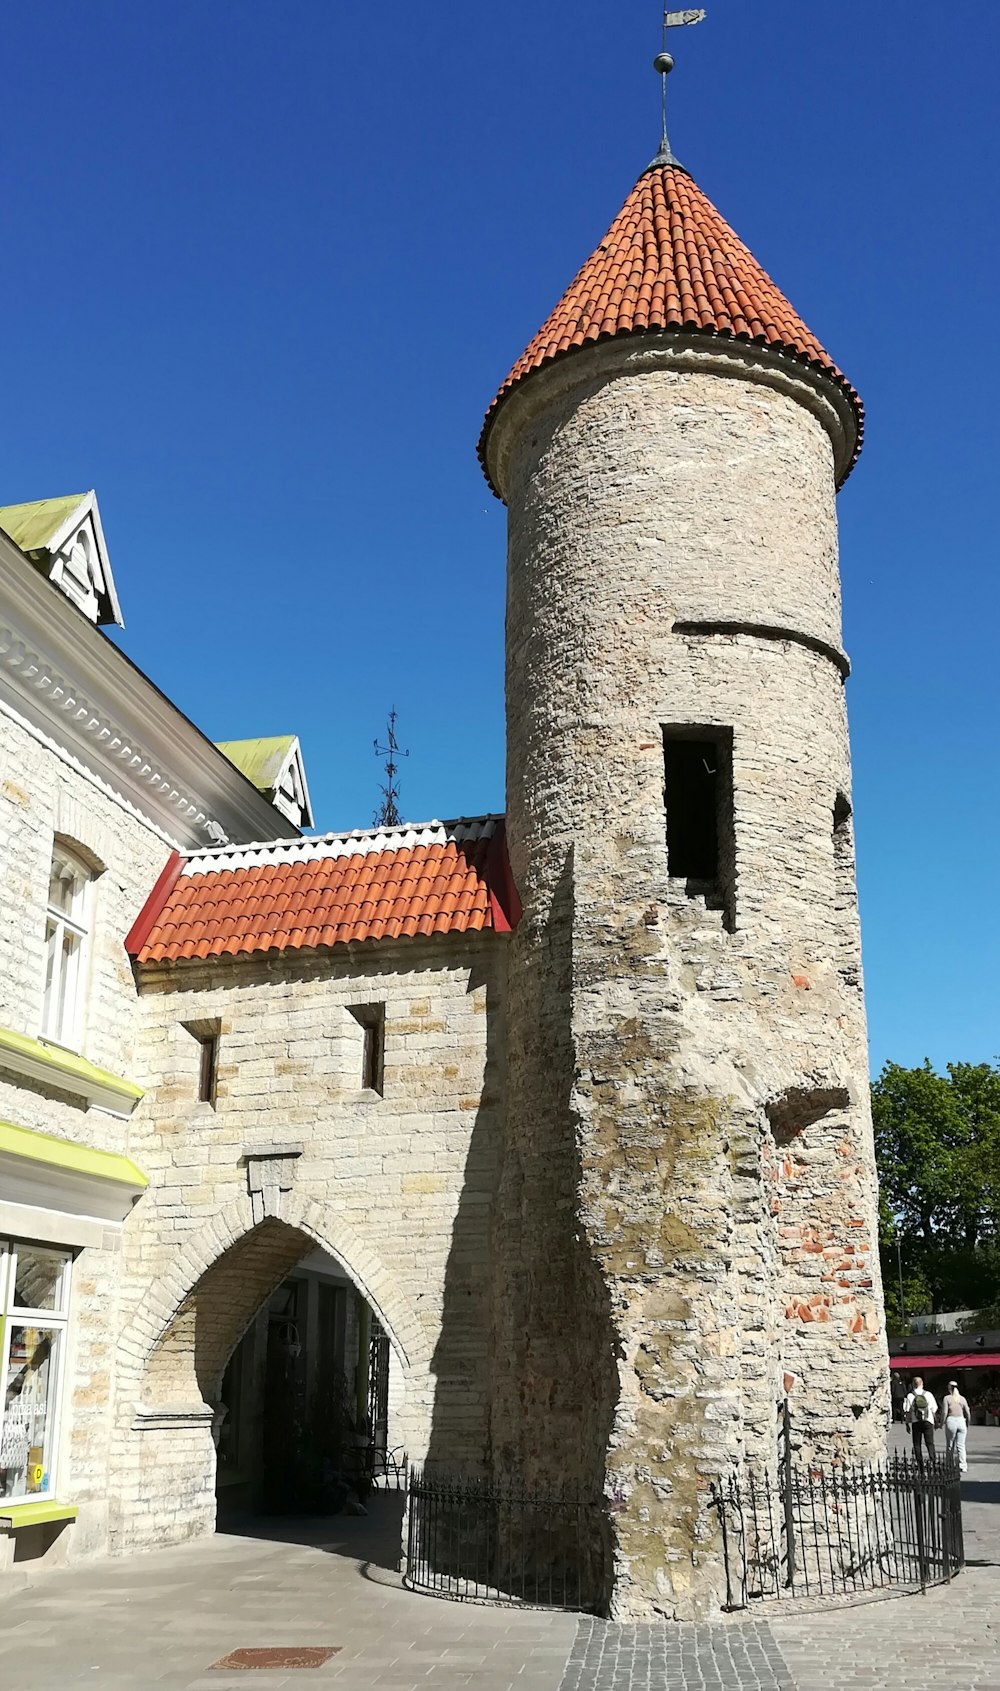 a stone tower with a red tiled roof